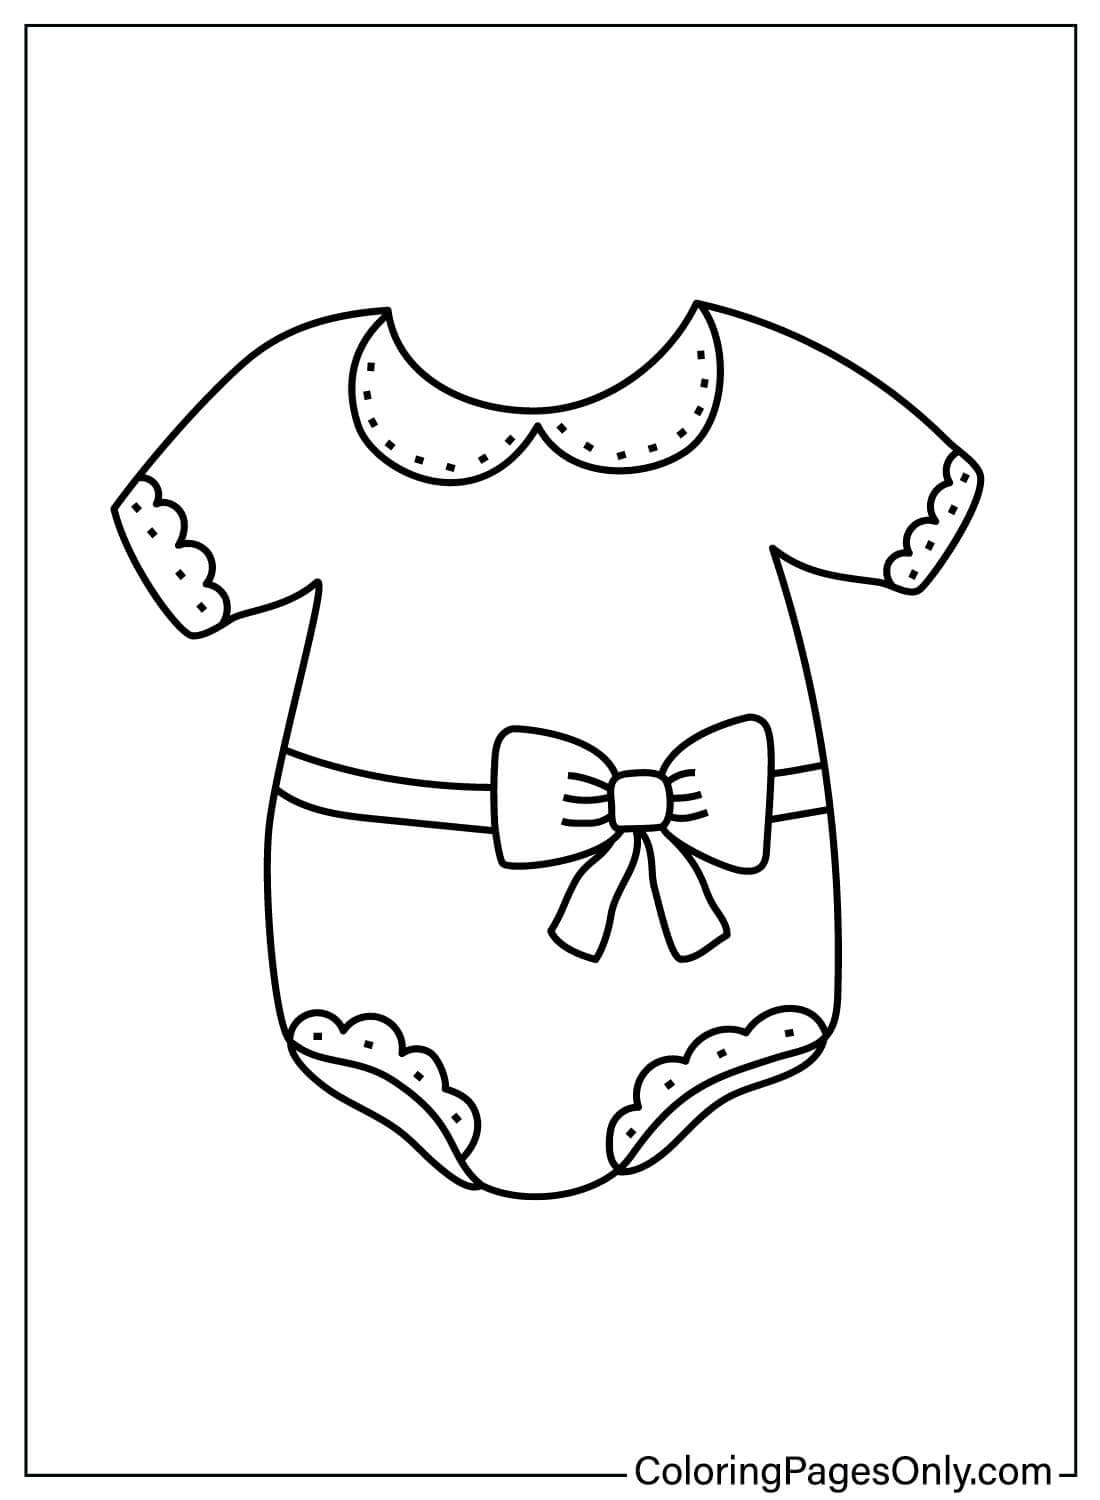 Baby Clothes Coloring Page For Preschool from Baby Clothes